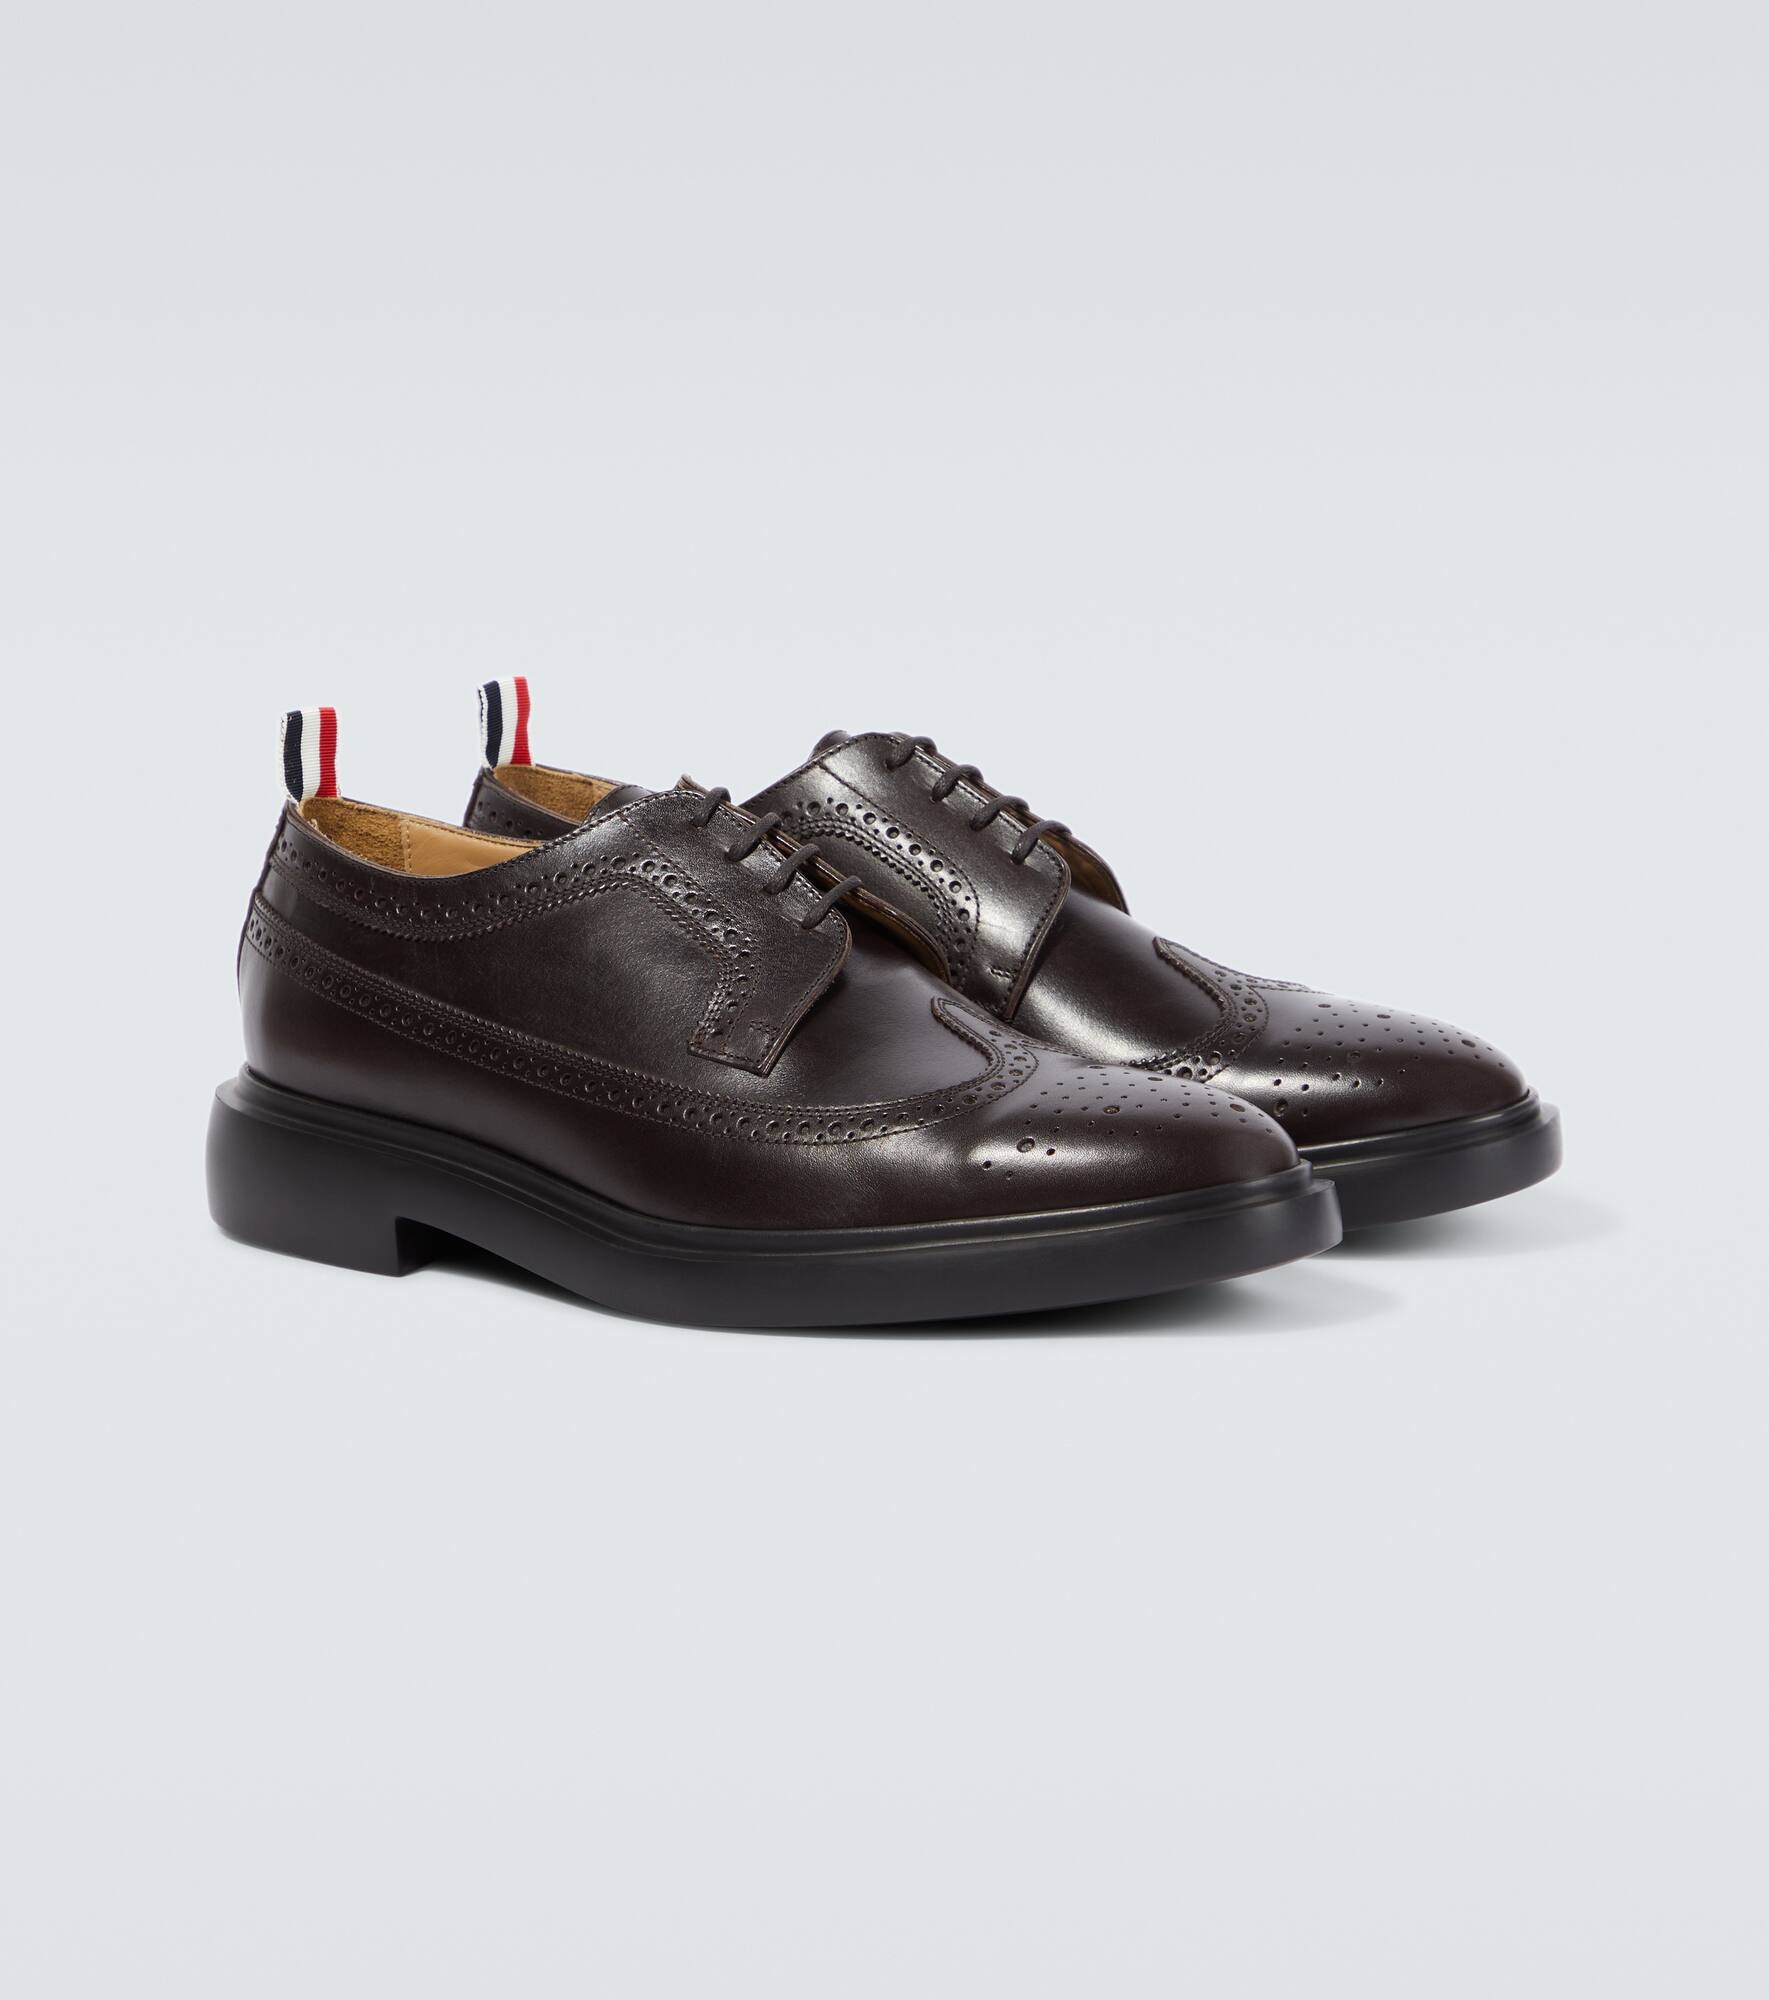 Longwing leather derby shoes - 5